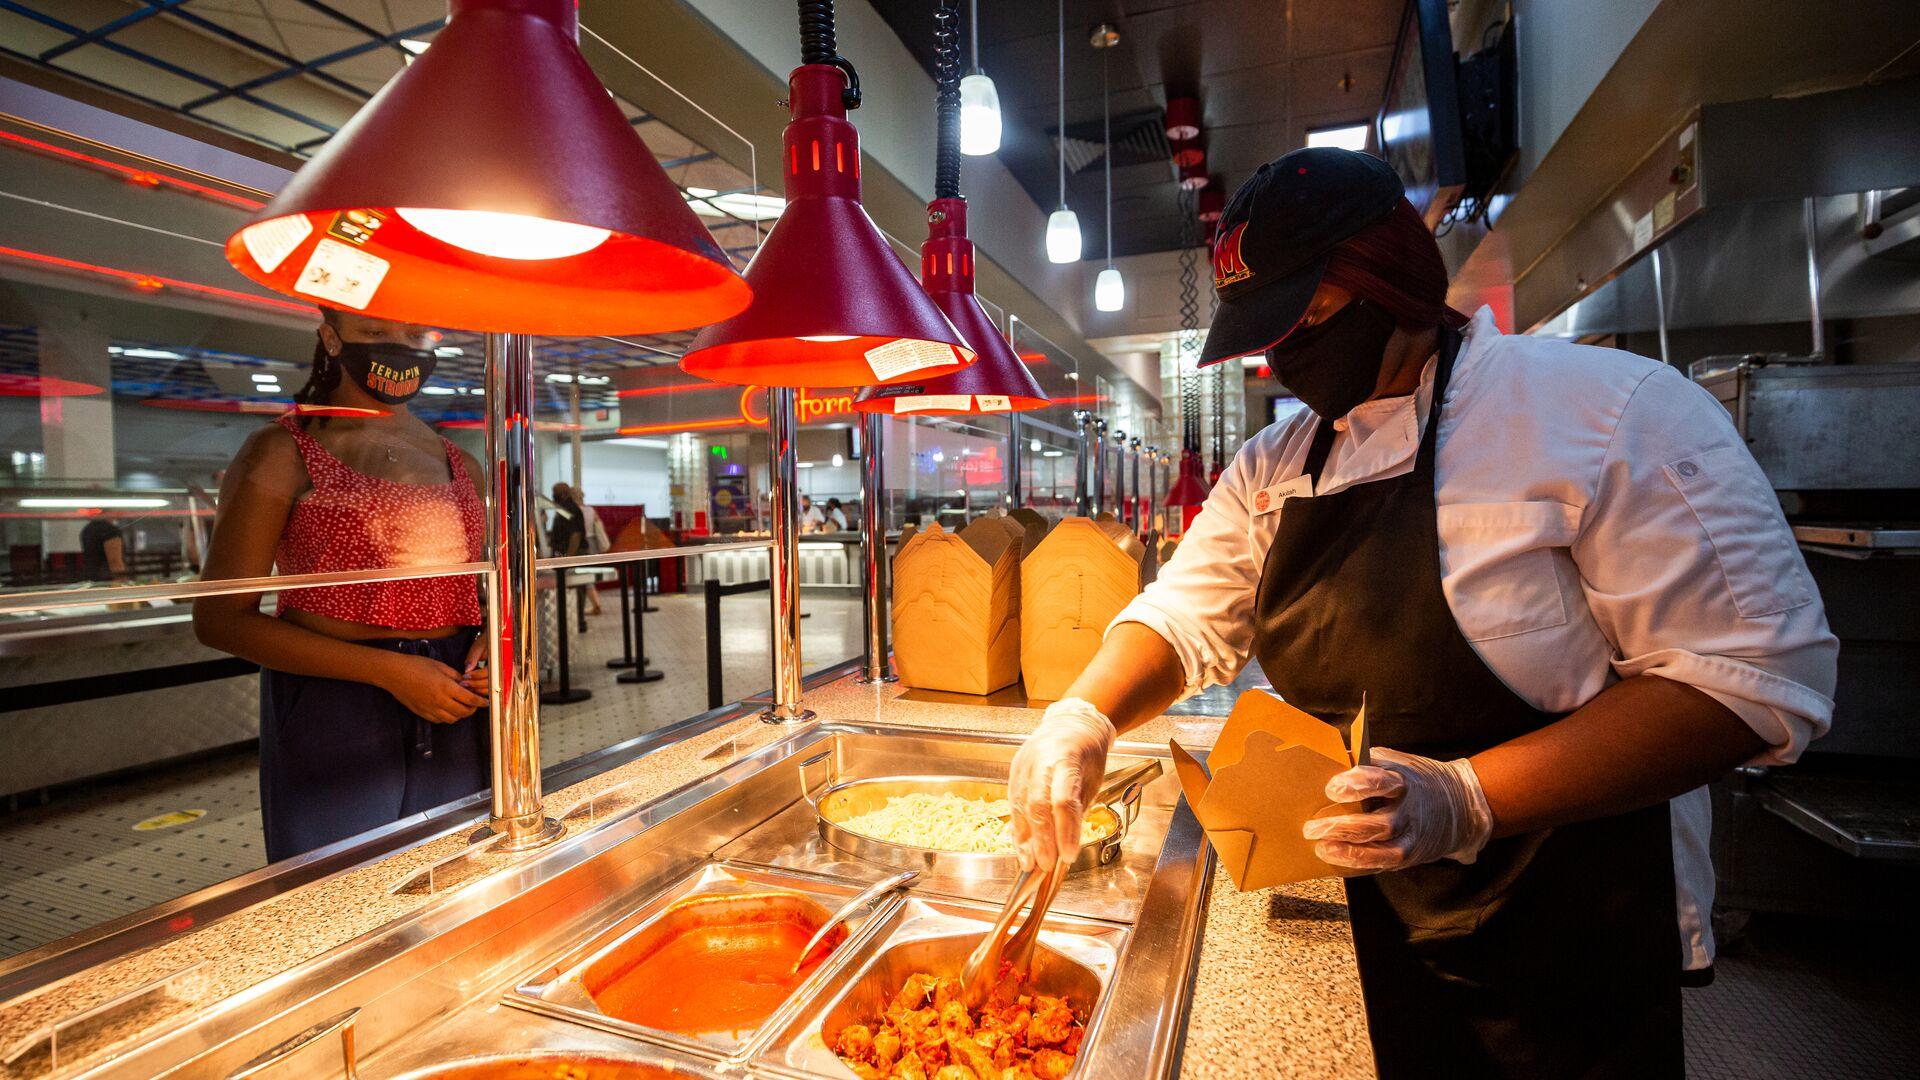 Dining staff member putting pasta in a container in one of the food stations at the Diner as a student waits in line